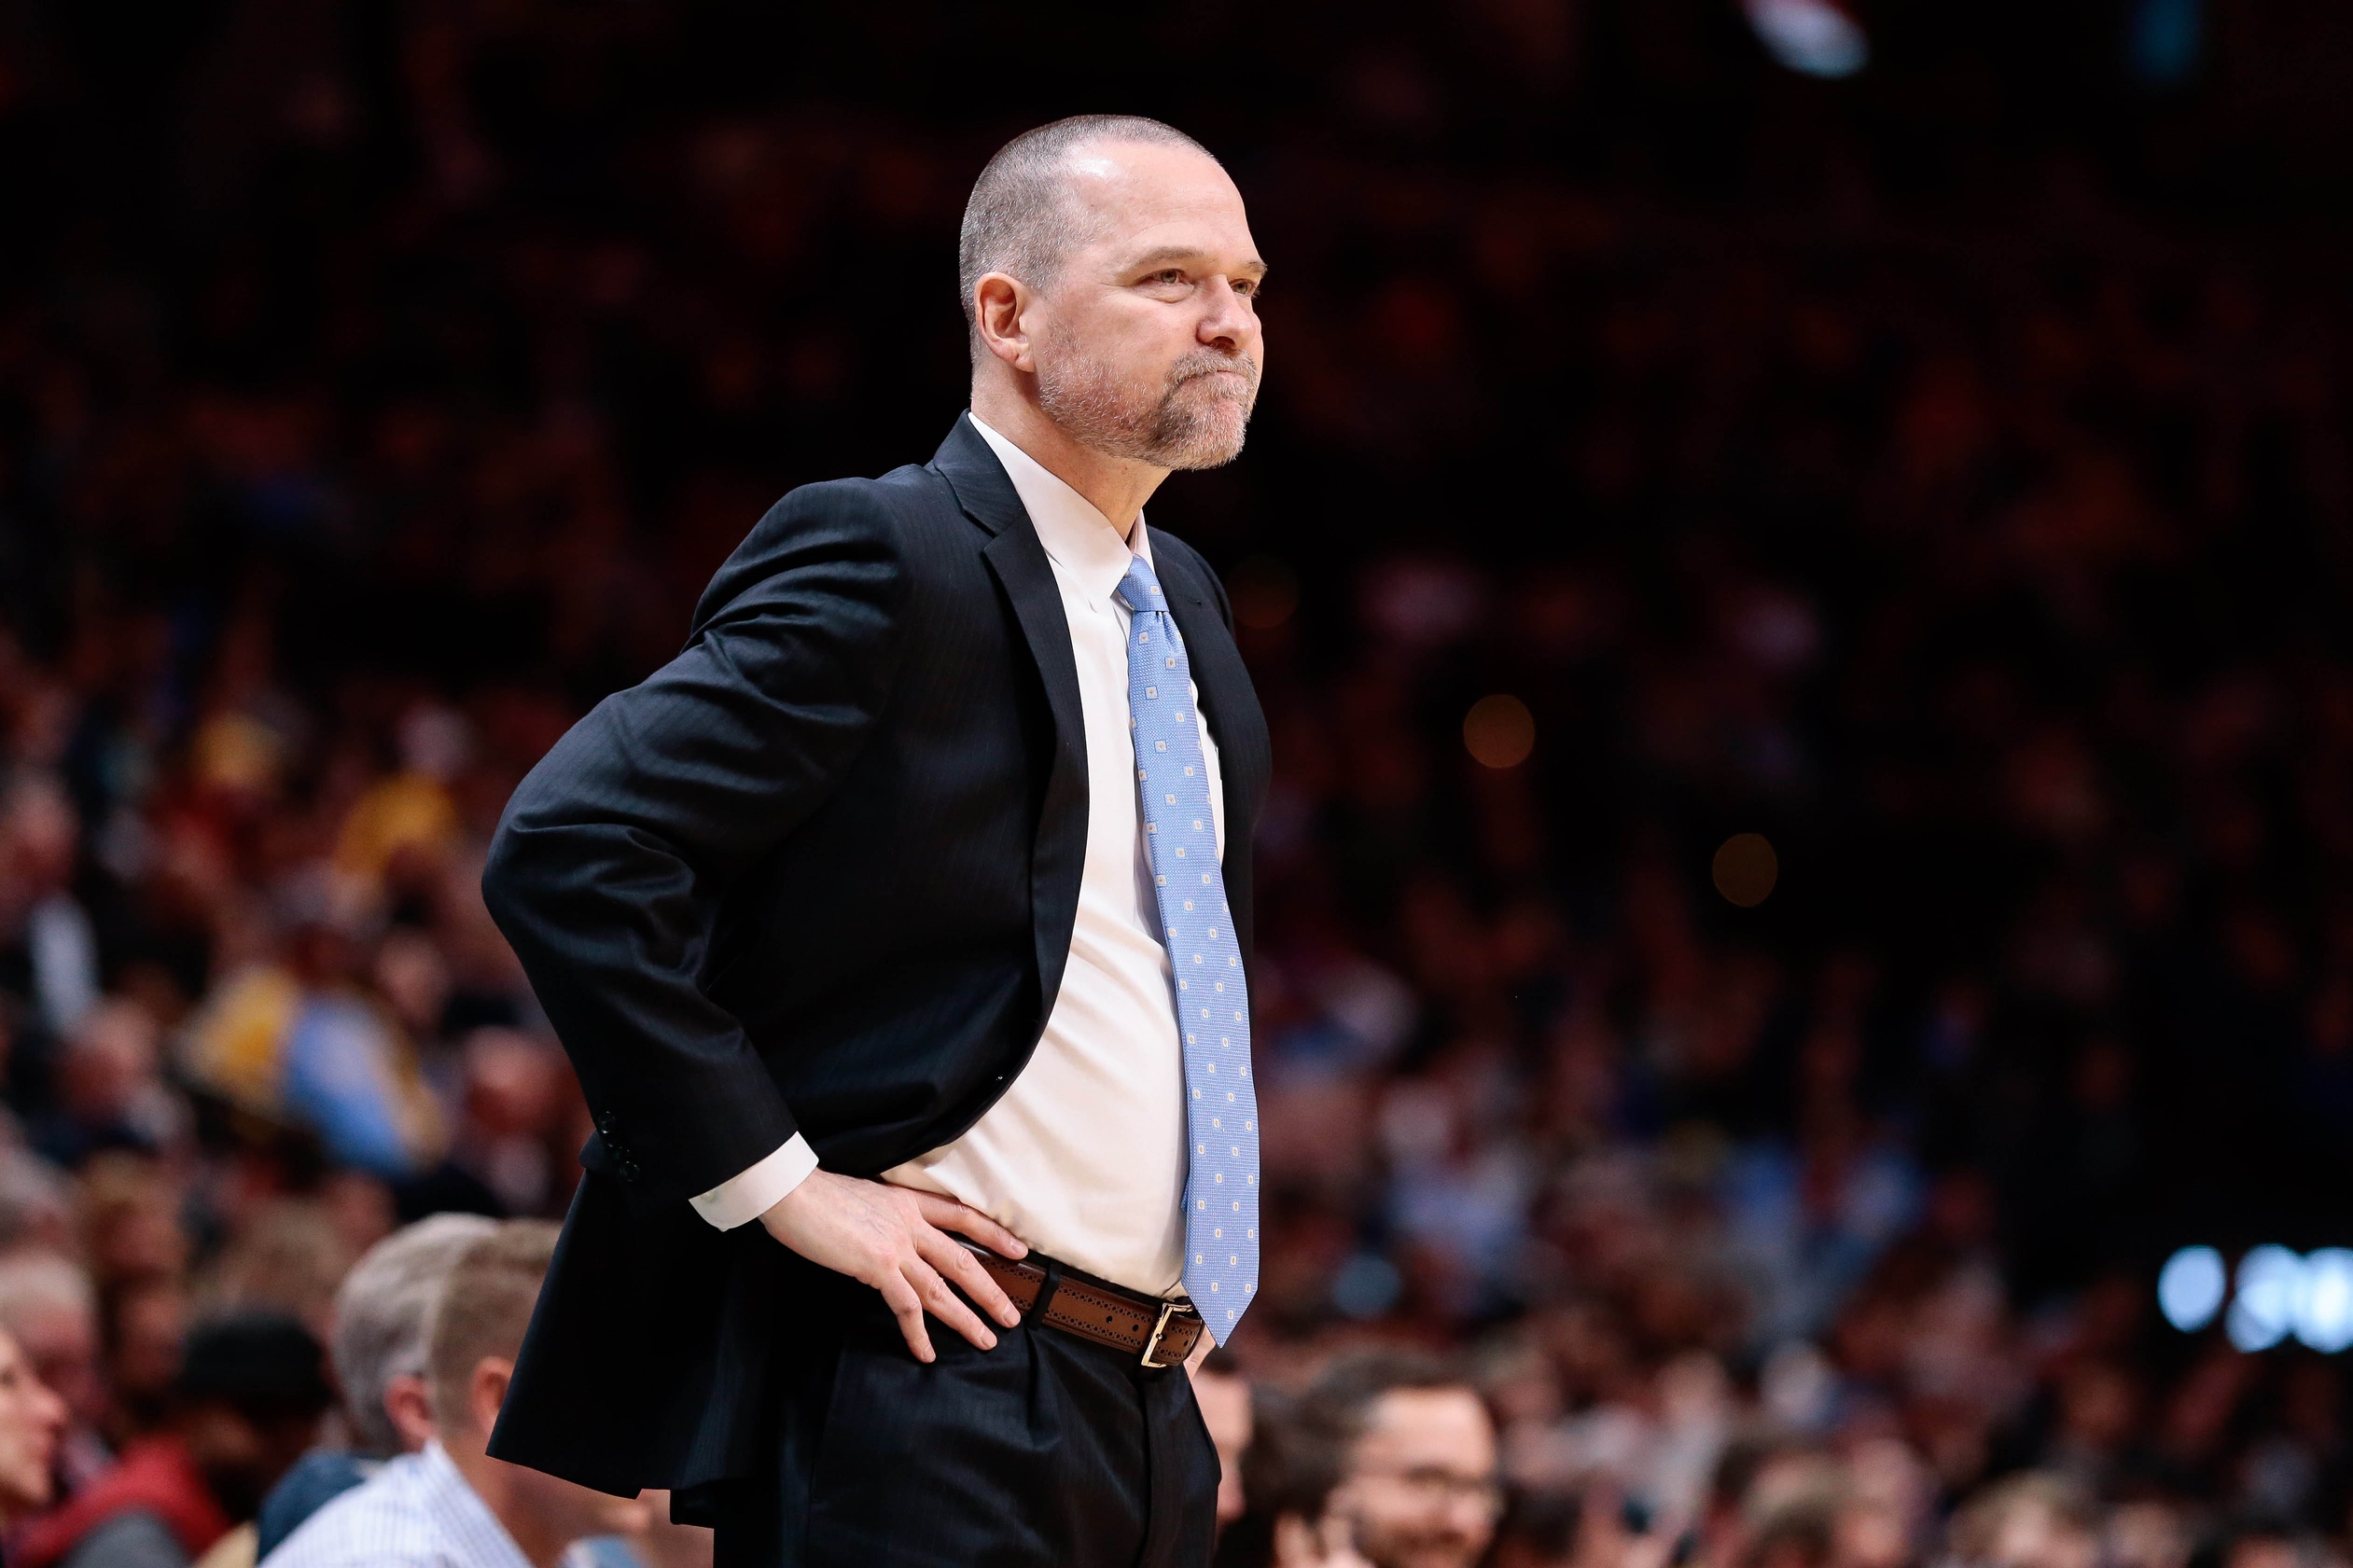 By giving up some control, Michael Malone becomes a better coach